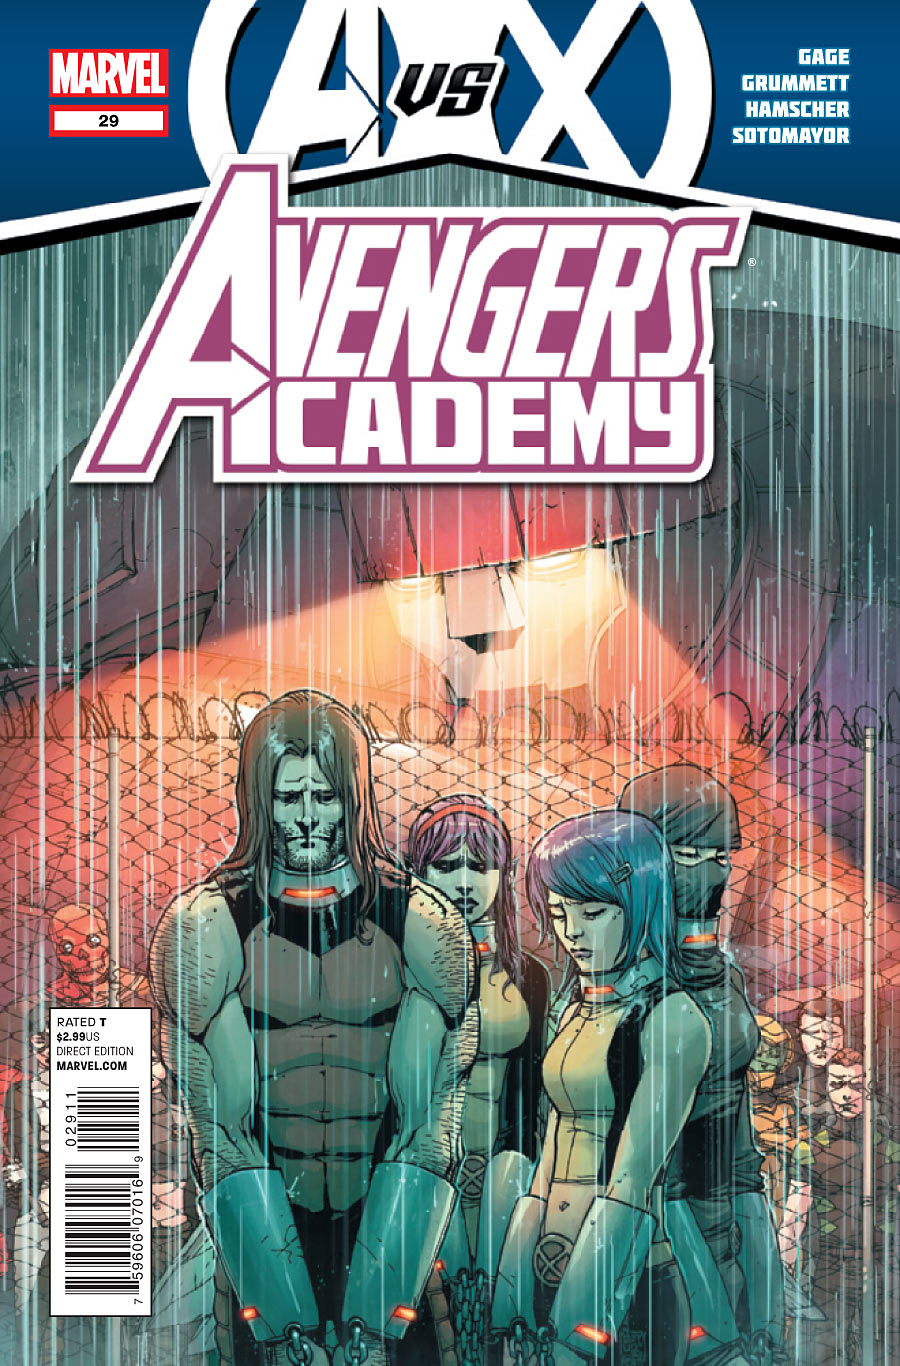 Avengers Academy, Vol. 1 by Christos Gage